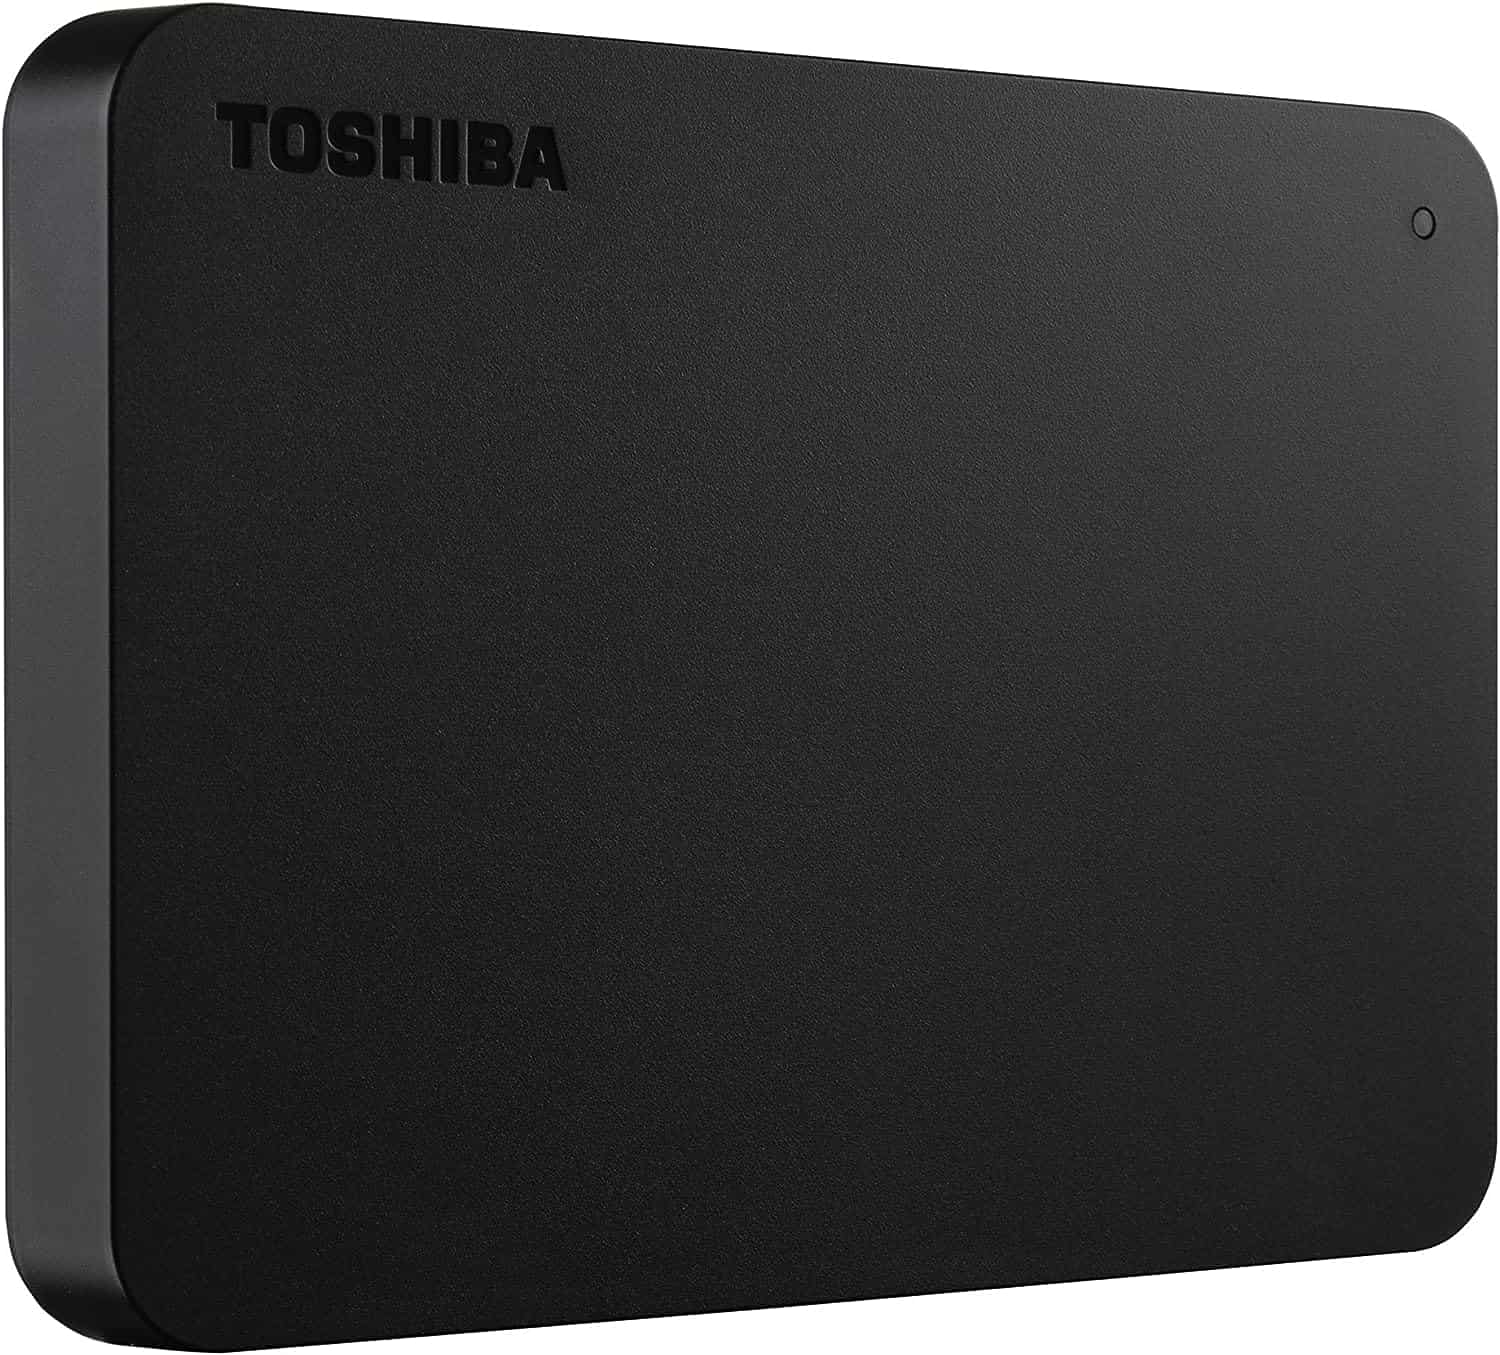 The Toshiba external hard drive is shown on a white background.